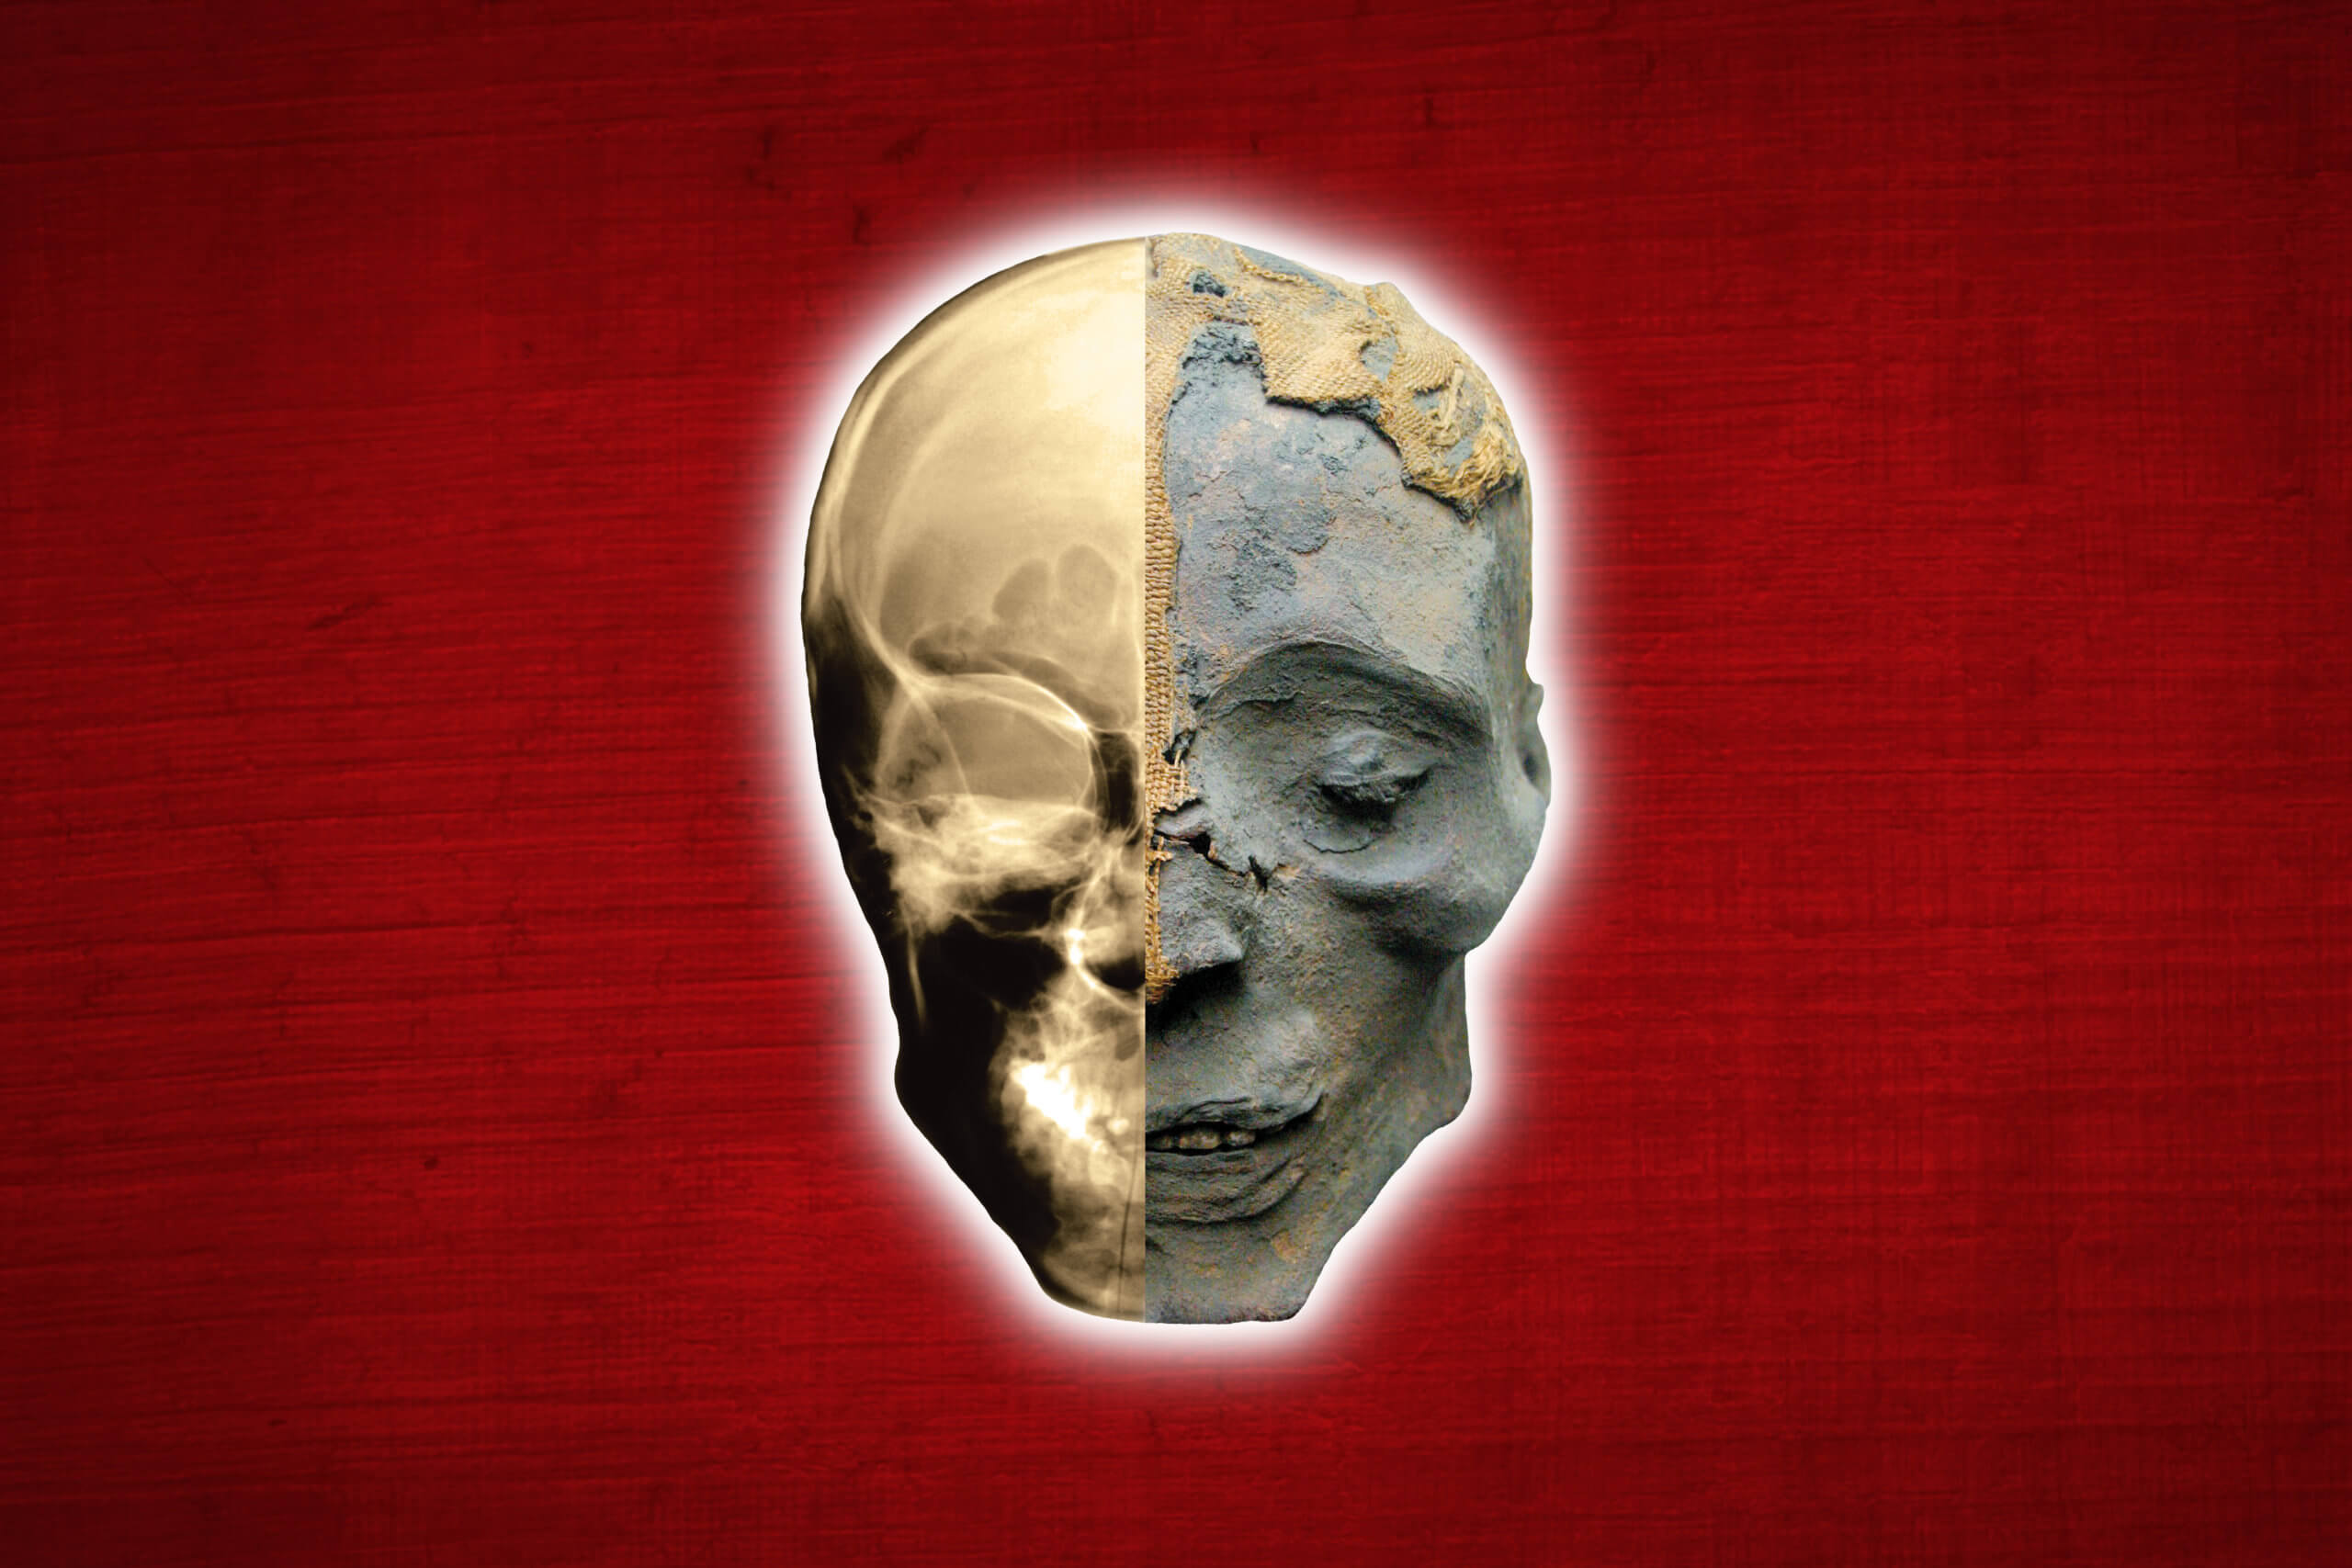 Mummies of the World: The Exhibition